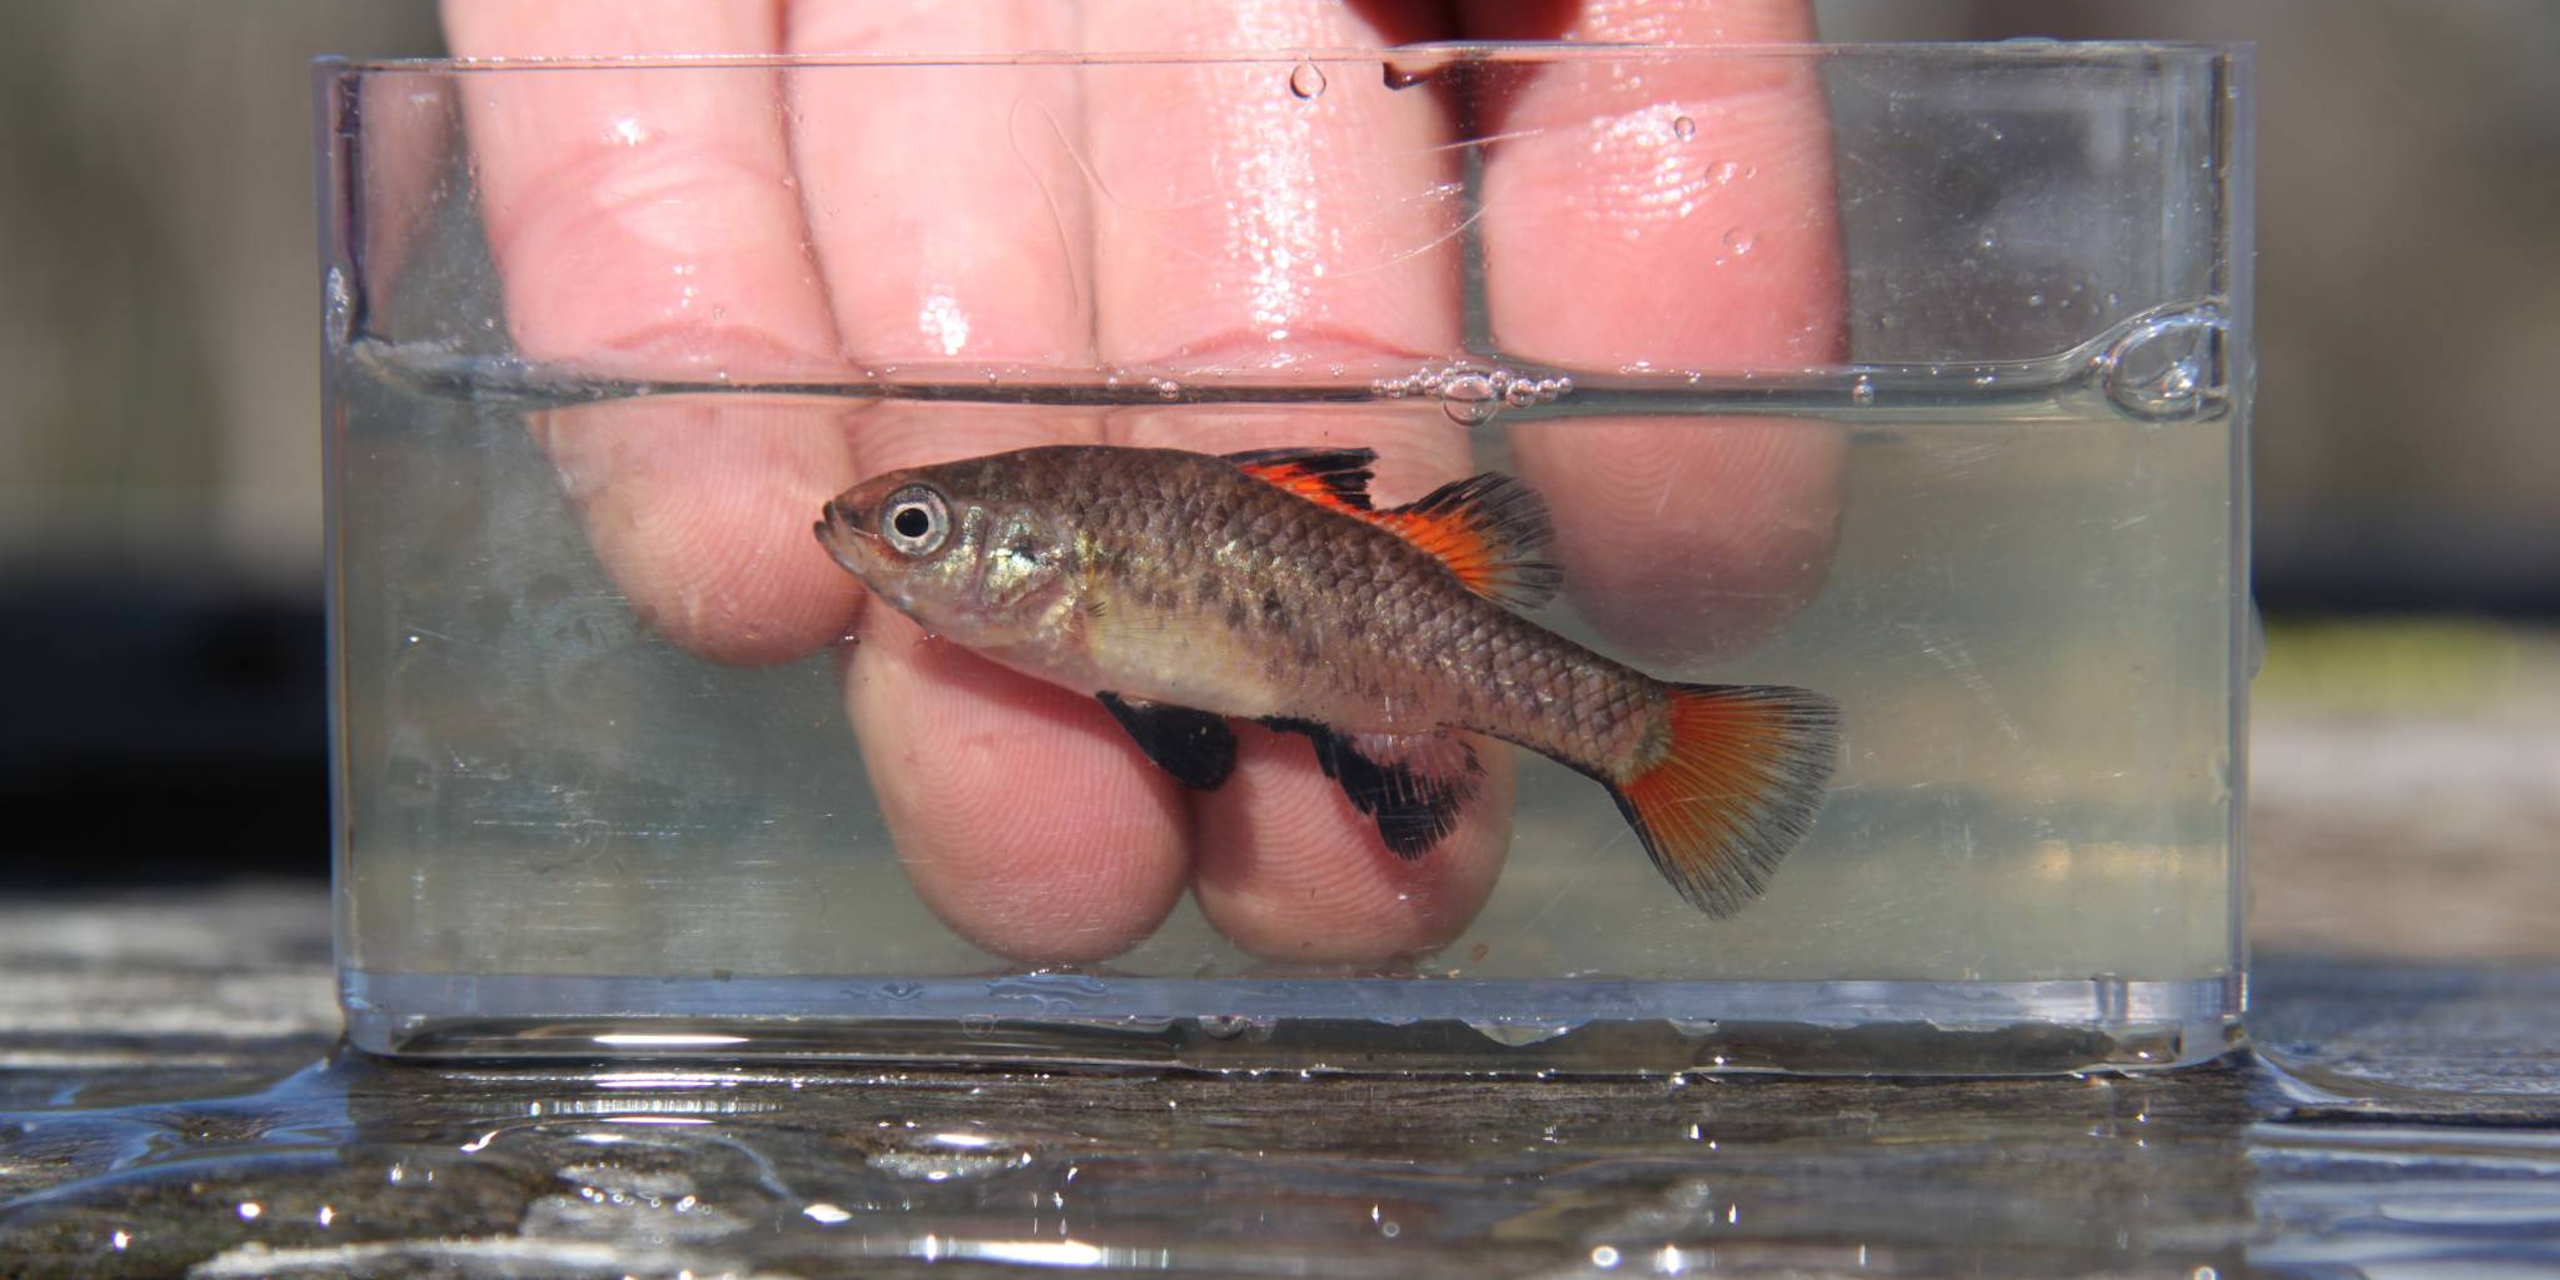 A southern pygmy perch in a glass bowl of water with a hand behind it